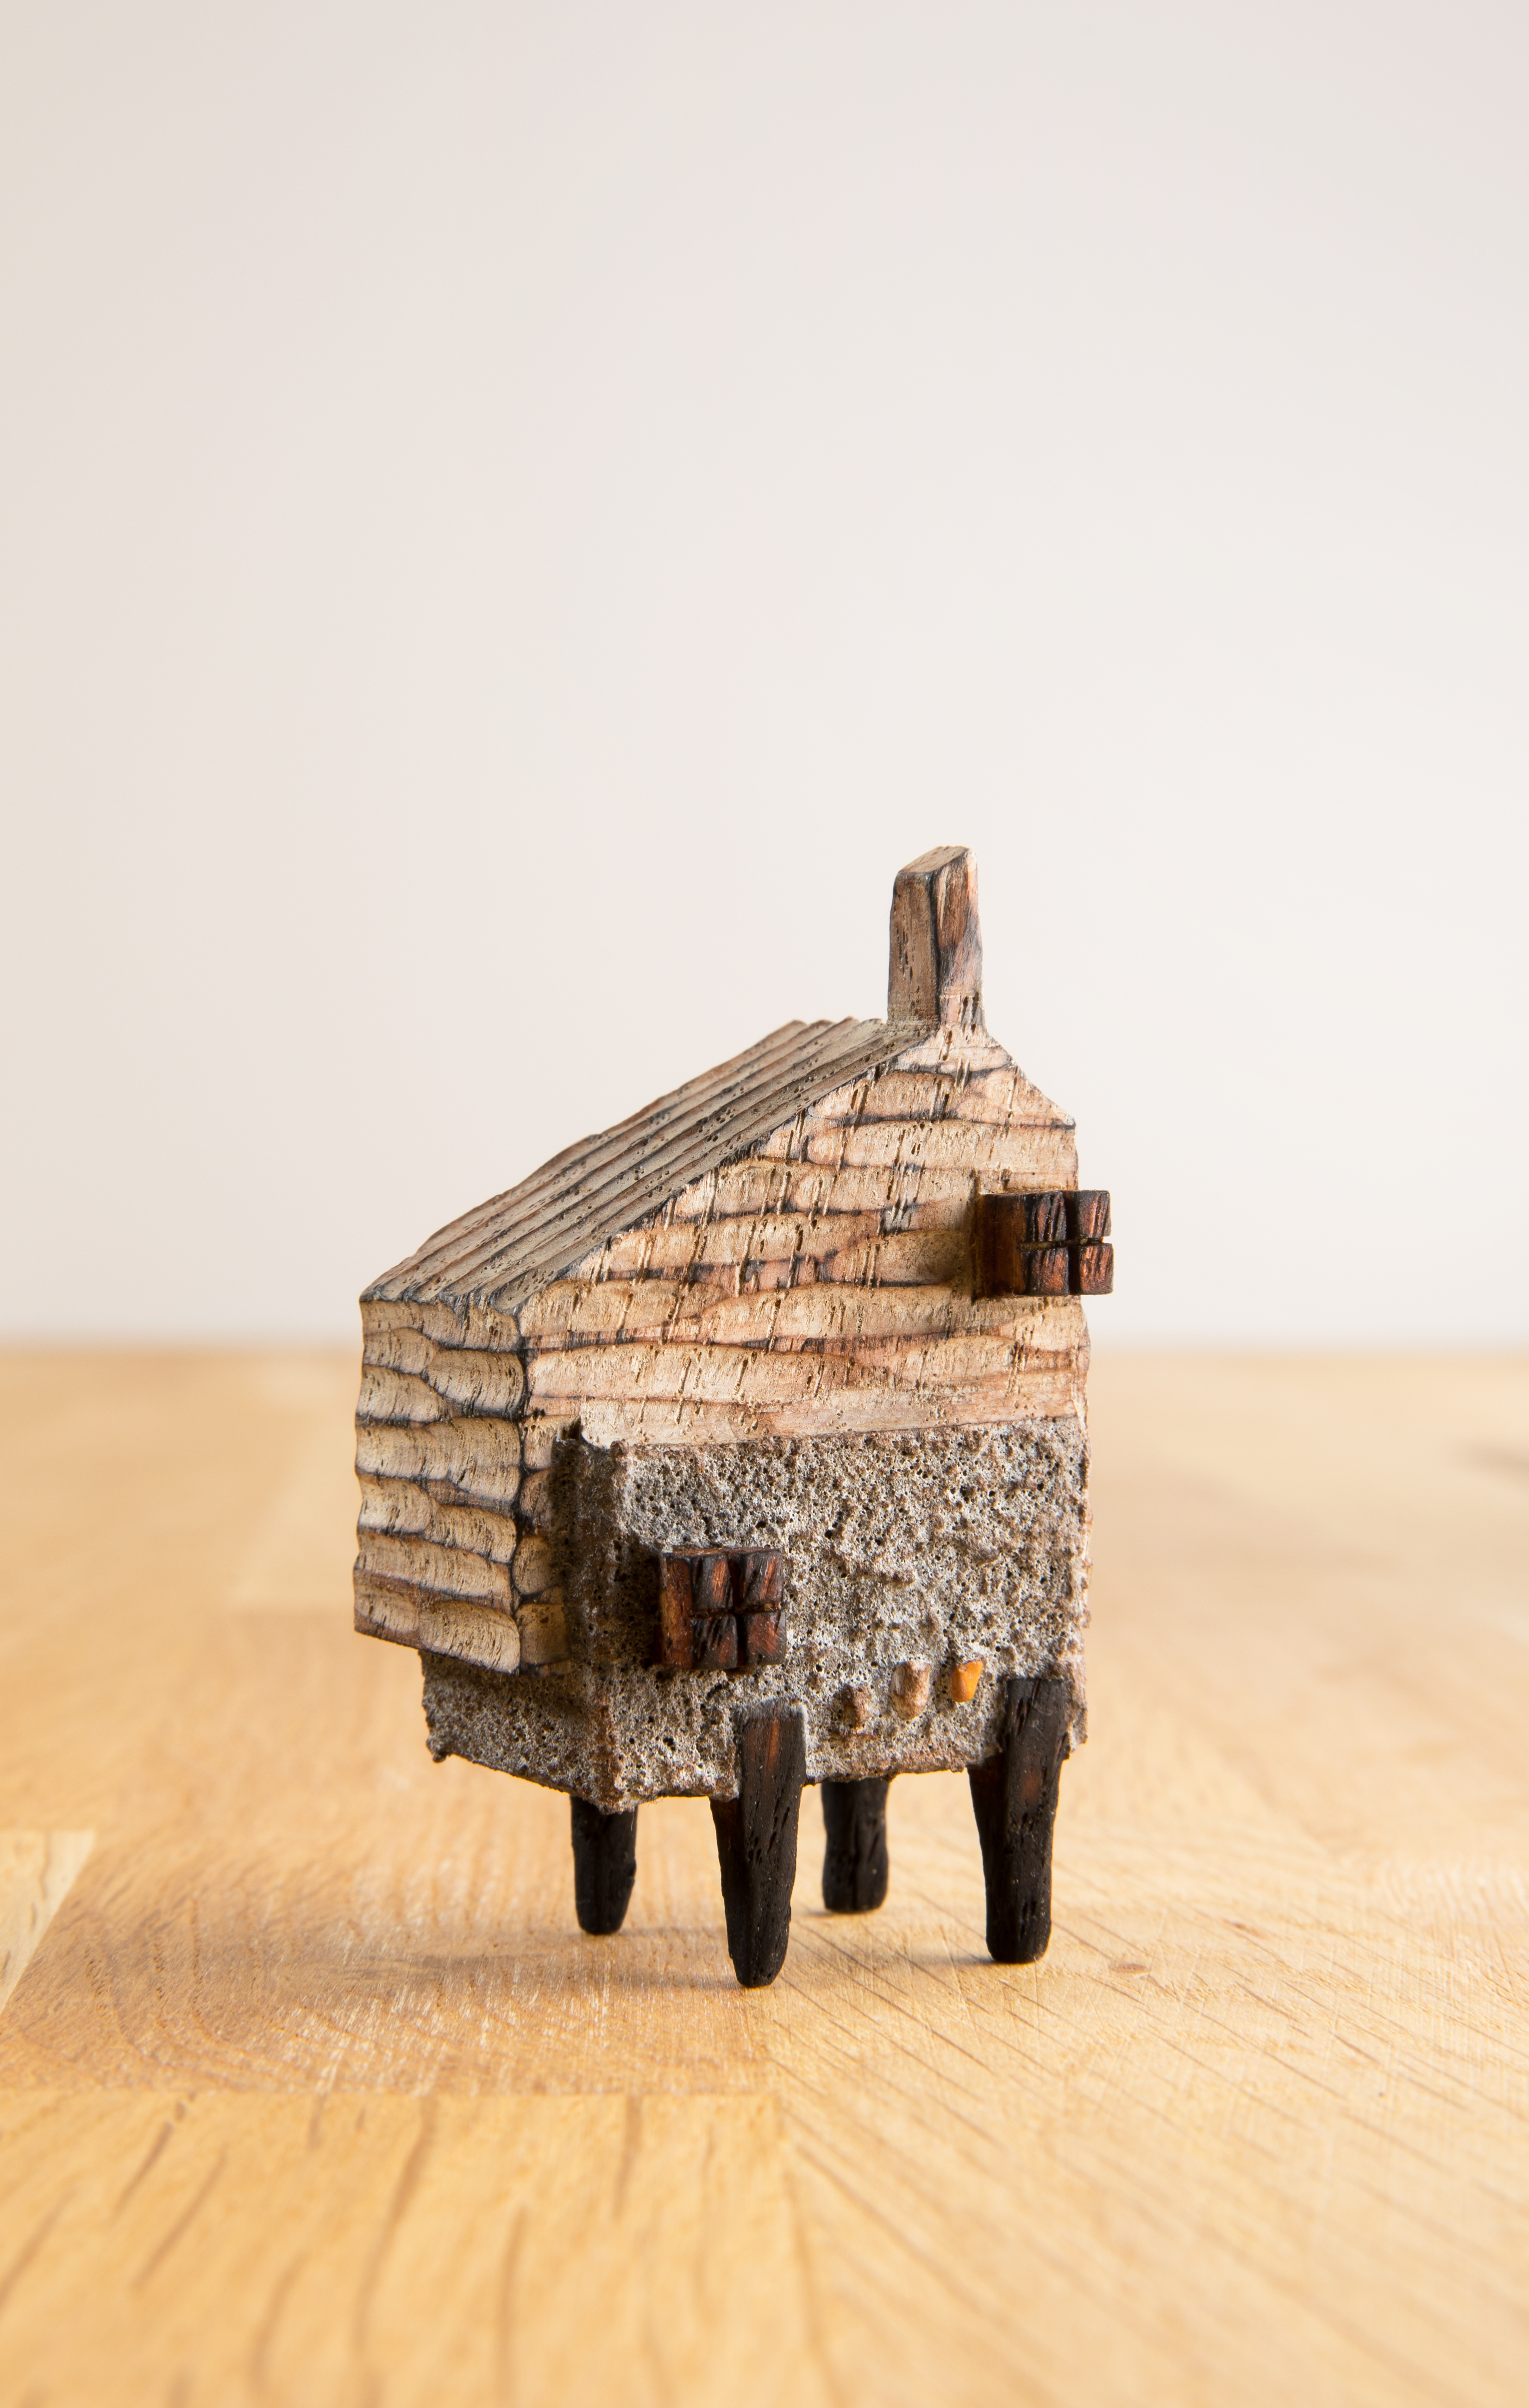 A miniature carved wooden house